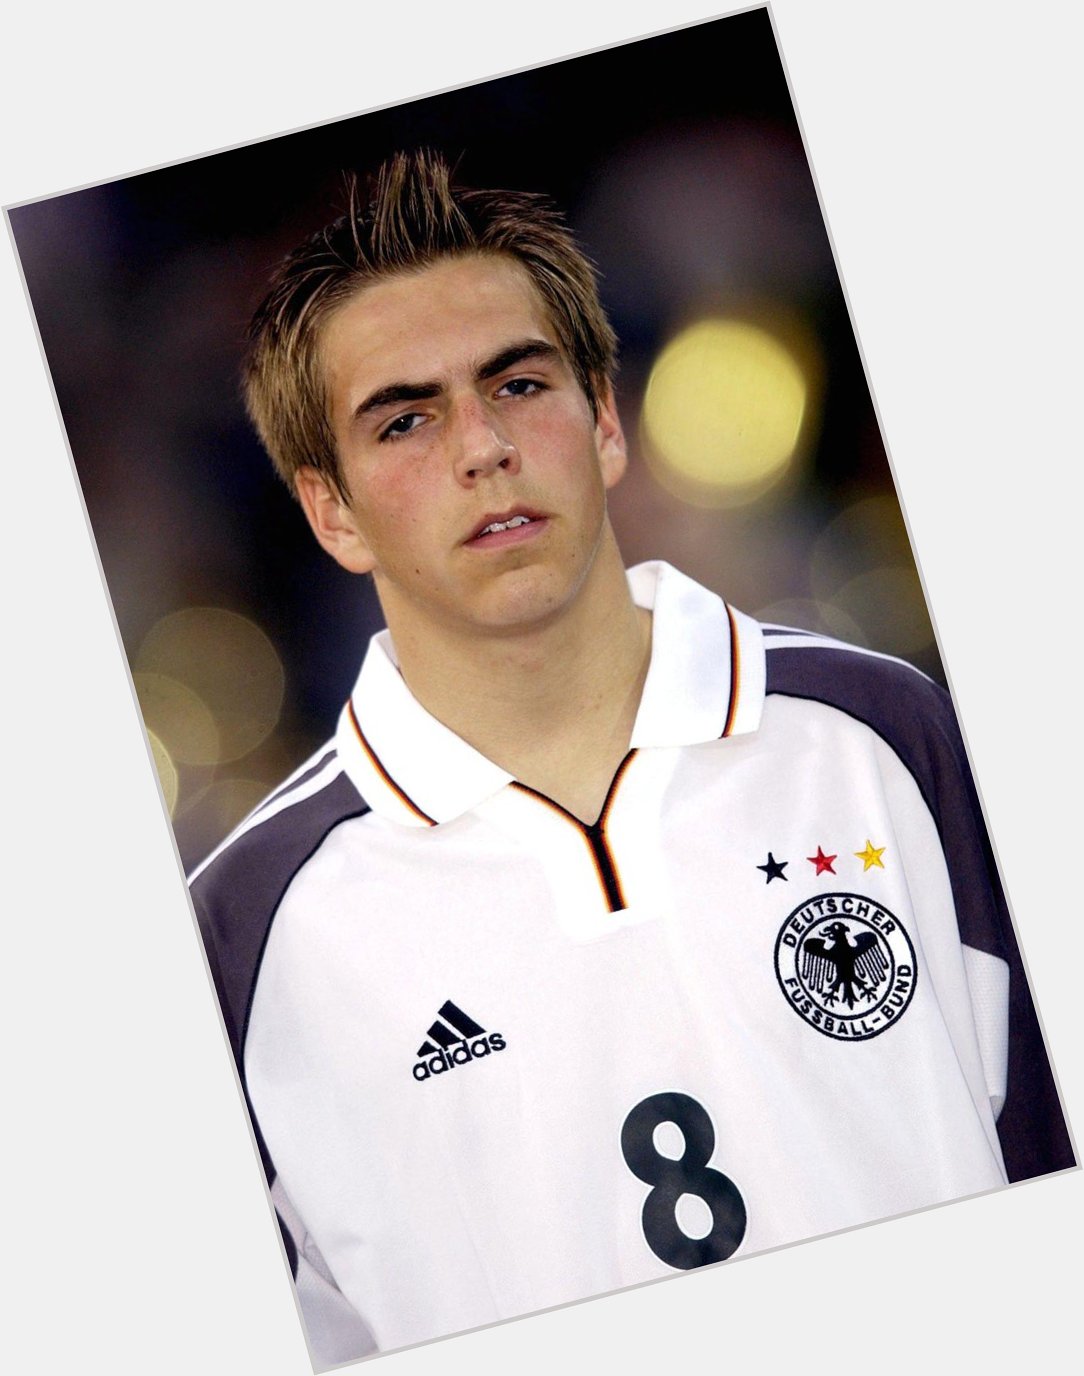 "UEFAEURO: A legend was born on this day in 1983. Happy birthday, Philipp Lahm! 
Knp mukanya kea lg mabok gt